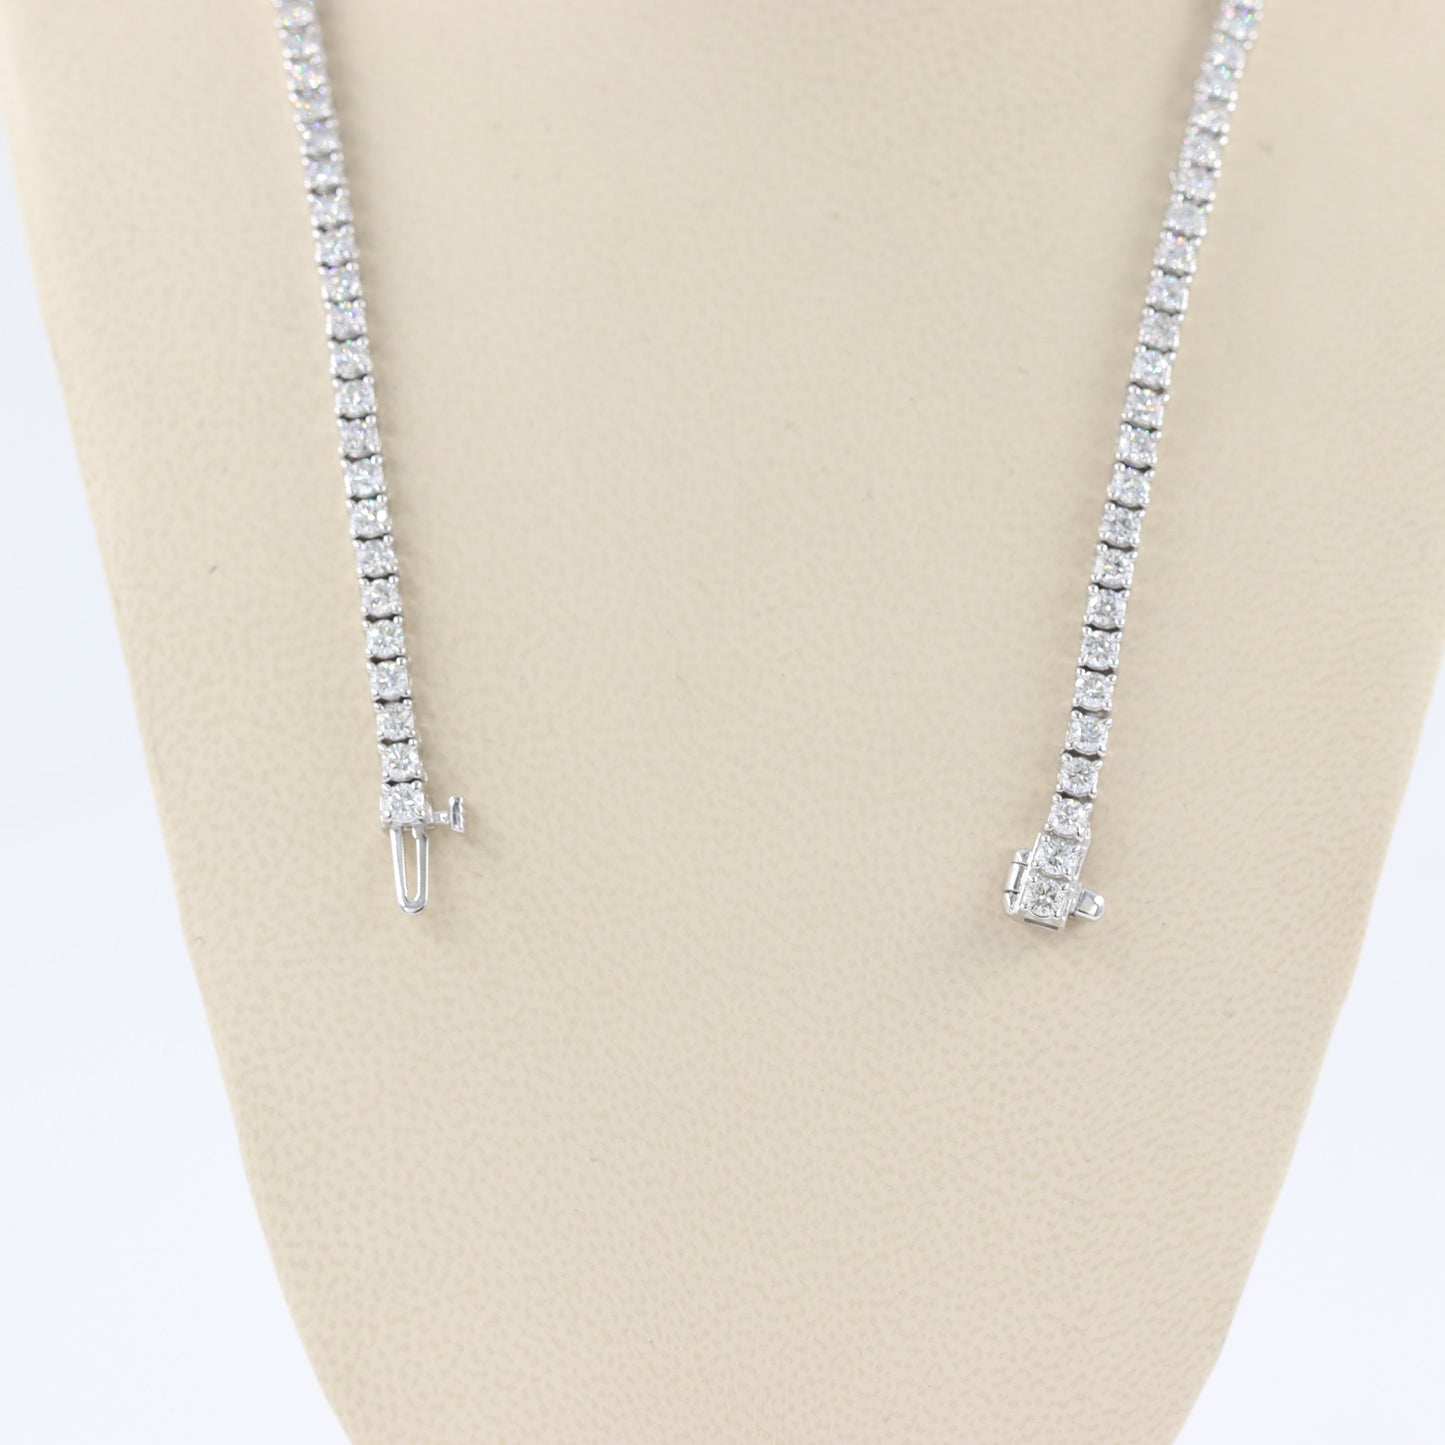 11ct Diamond Tennis Necklace/Natural Round Diamond Tennis Necklace/Diamond Engagement Necklace/Four prong Tennis Necklace/Anniversary Gift